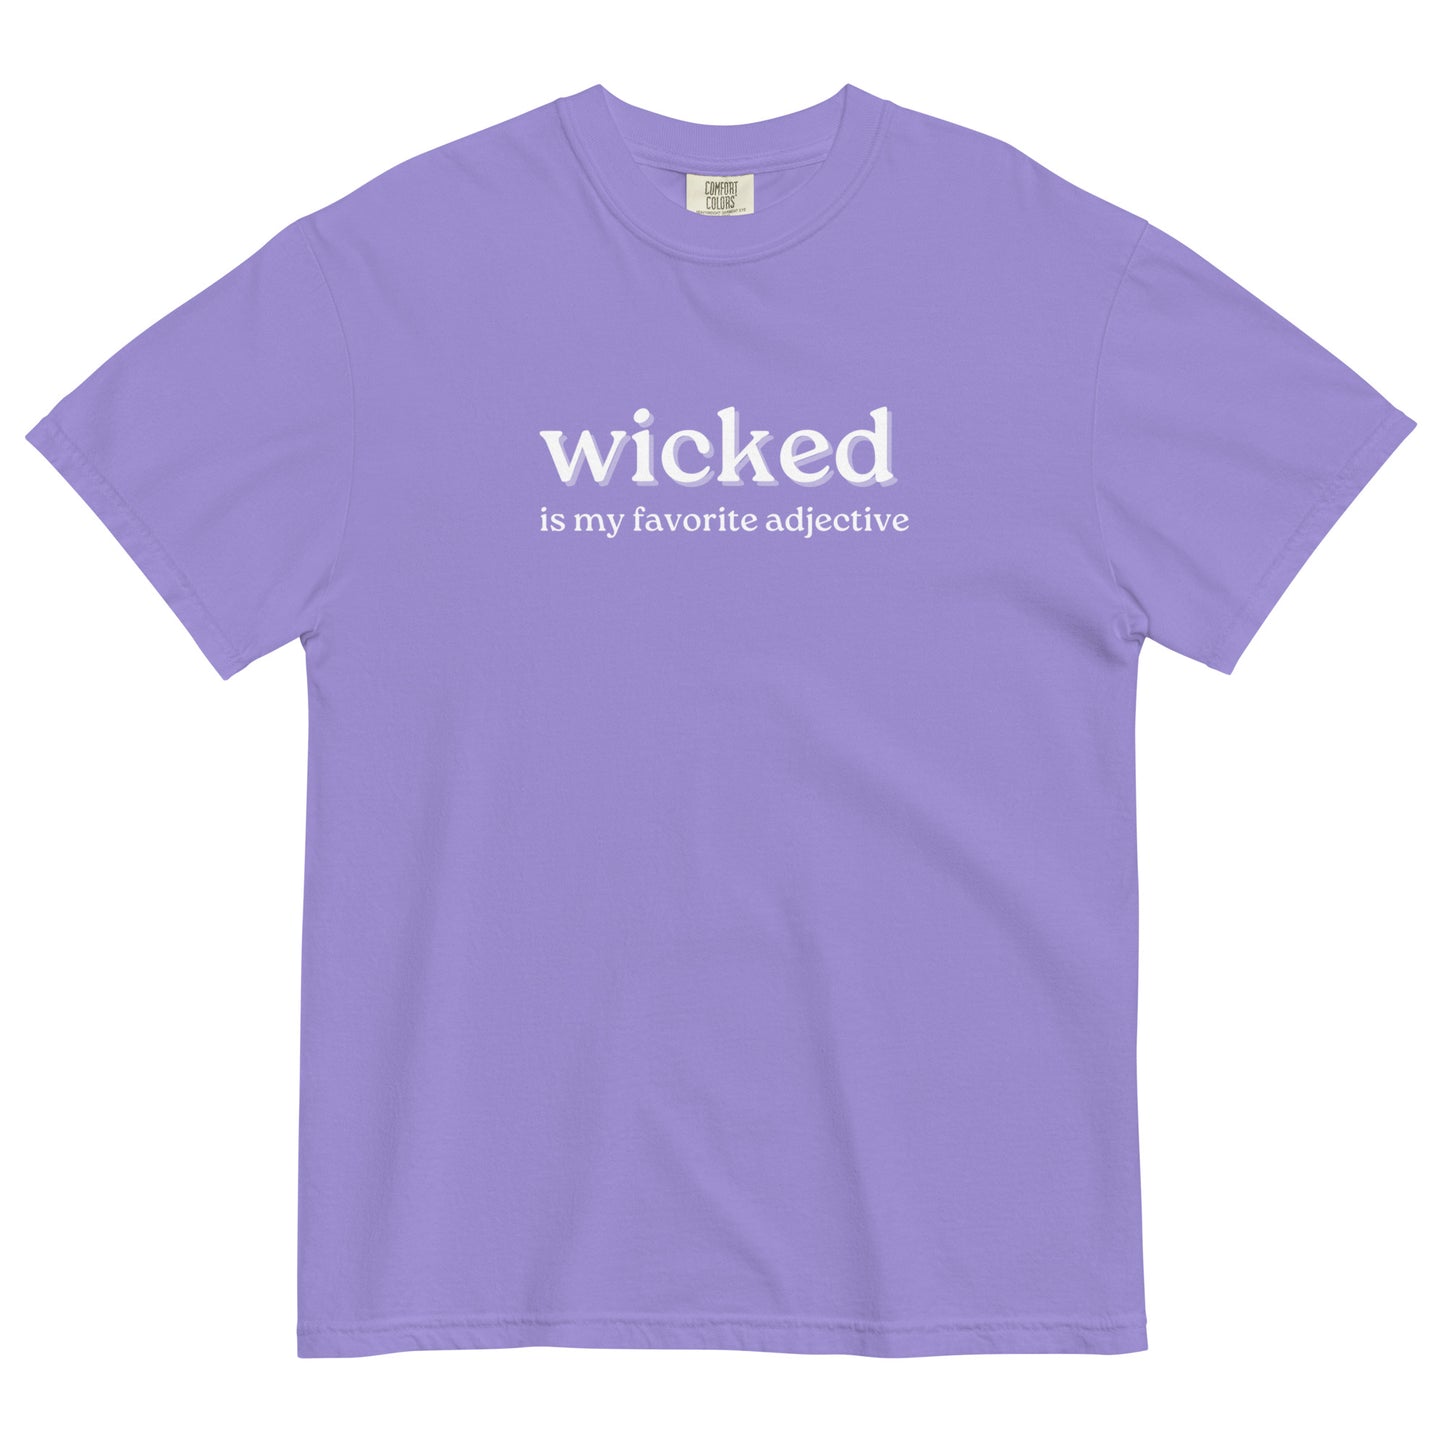 purple tshirt that says "wicked is my favorite adjective" in white lettering